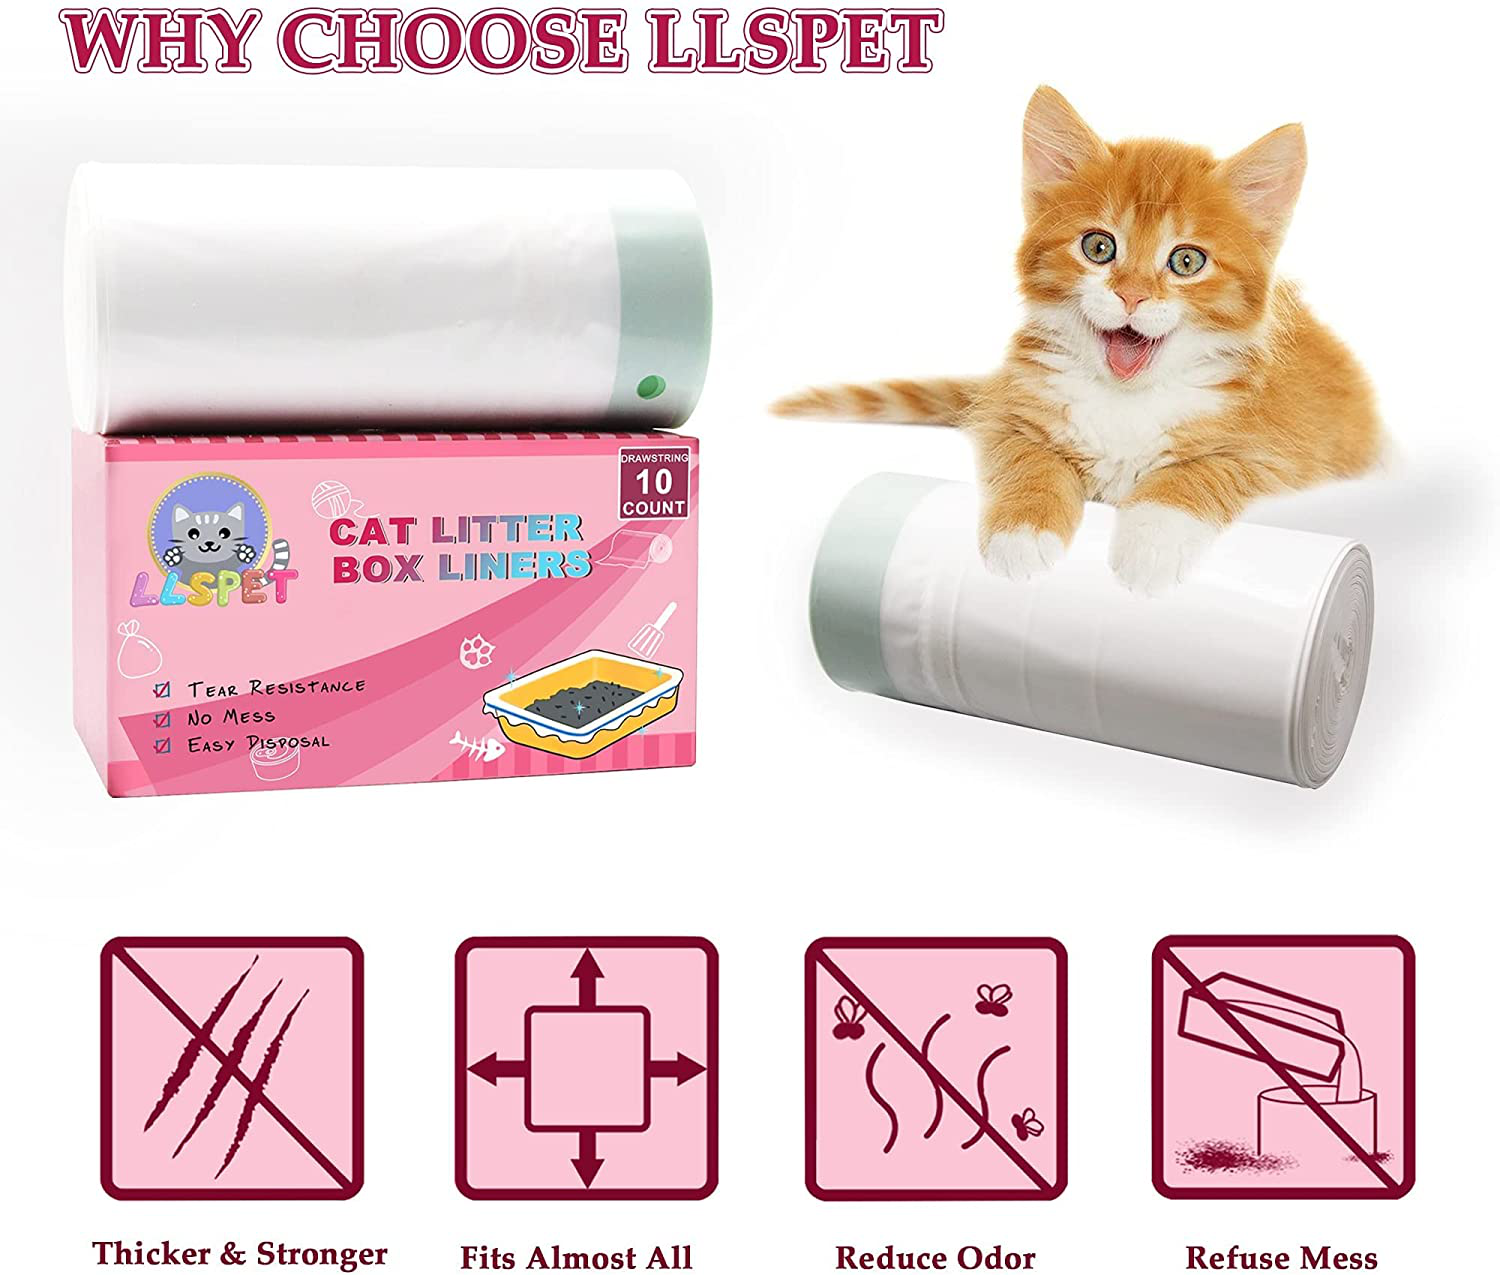 LLSPET Cat Litter Bags Valu-Pack of 10 Counts, Thicken Durable Litter Box Liner for Cats, Drawstring Pets Trash Bags -Tear Resistance,Without Odor (10 Count, 35.8IN17.7IN) Animals & Pet Supplies > Pet Supplies > Cat Supplies > Cat Litter Box Liners LLSPET   